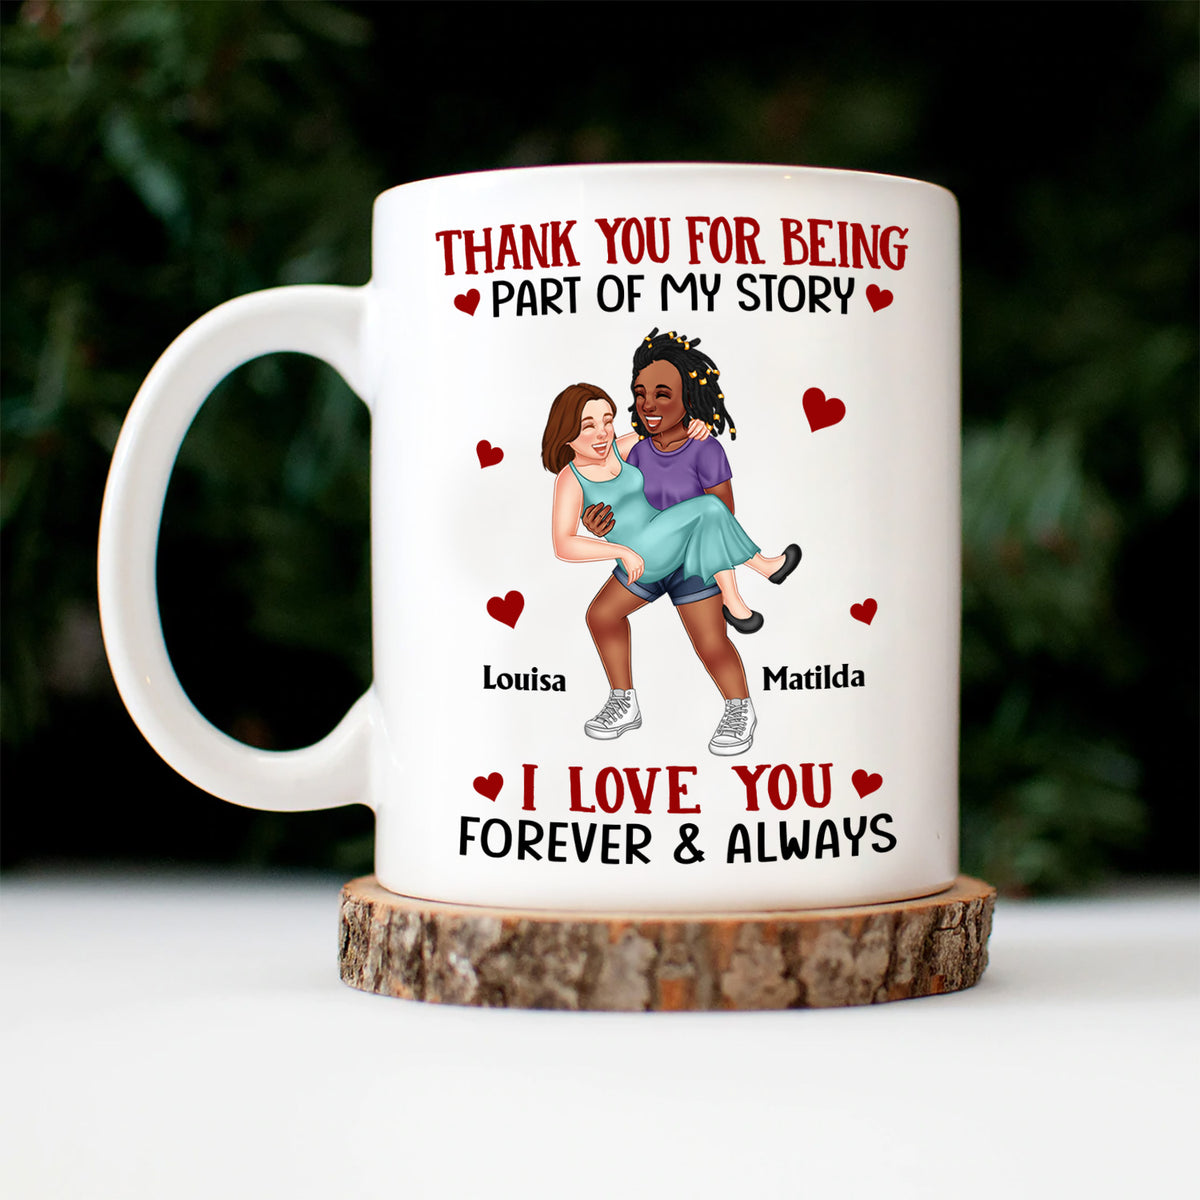 Thank You Heart Plaque Romantic Anniversary Valentines Day Gift For Husband  Wife | eBay